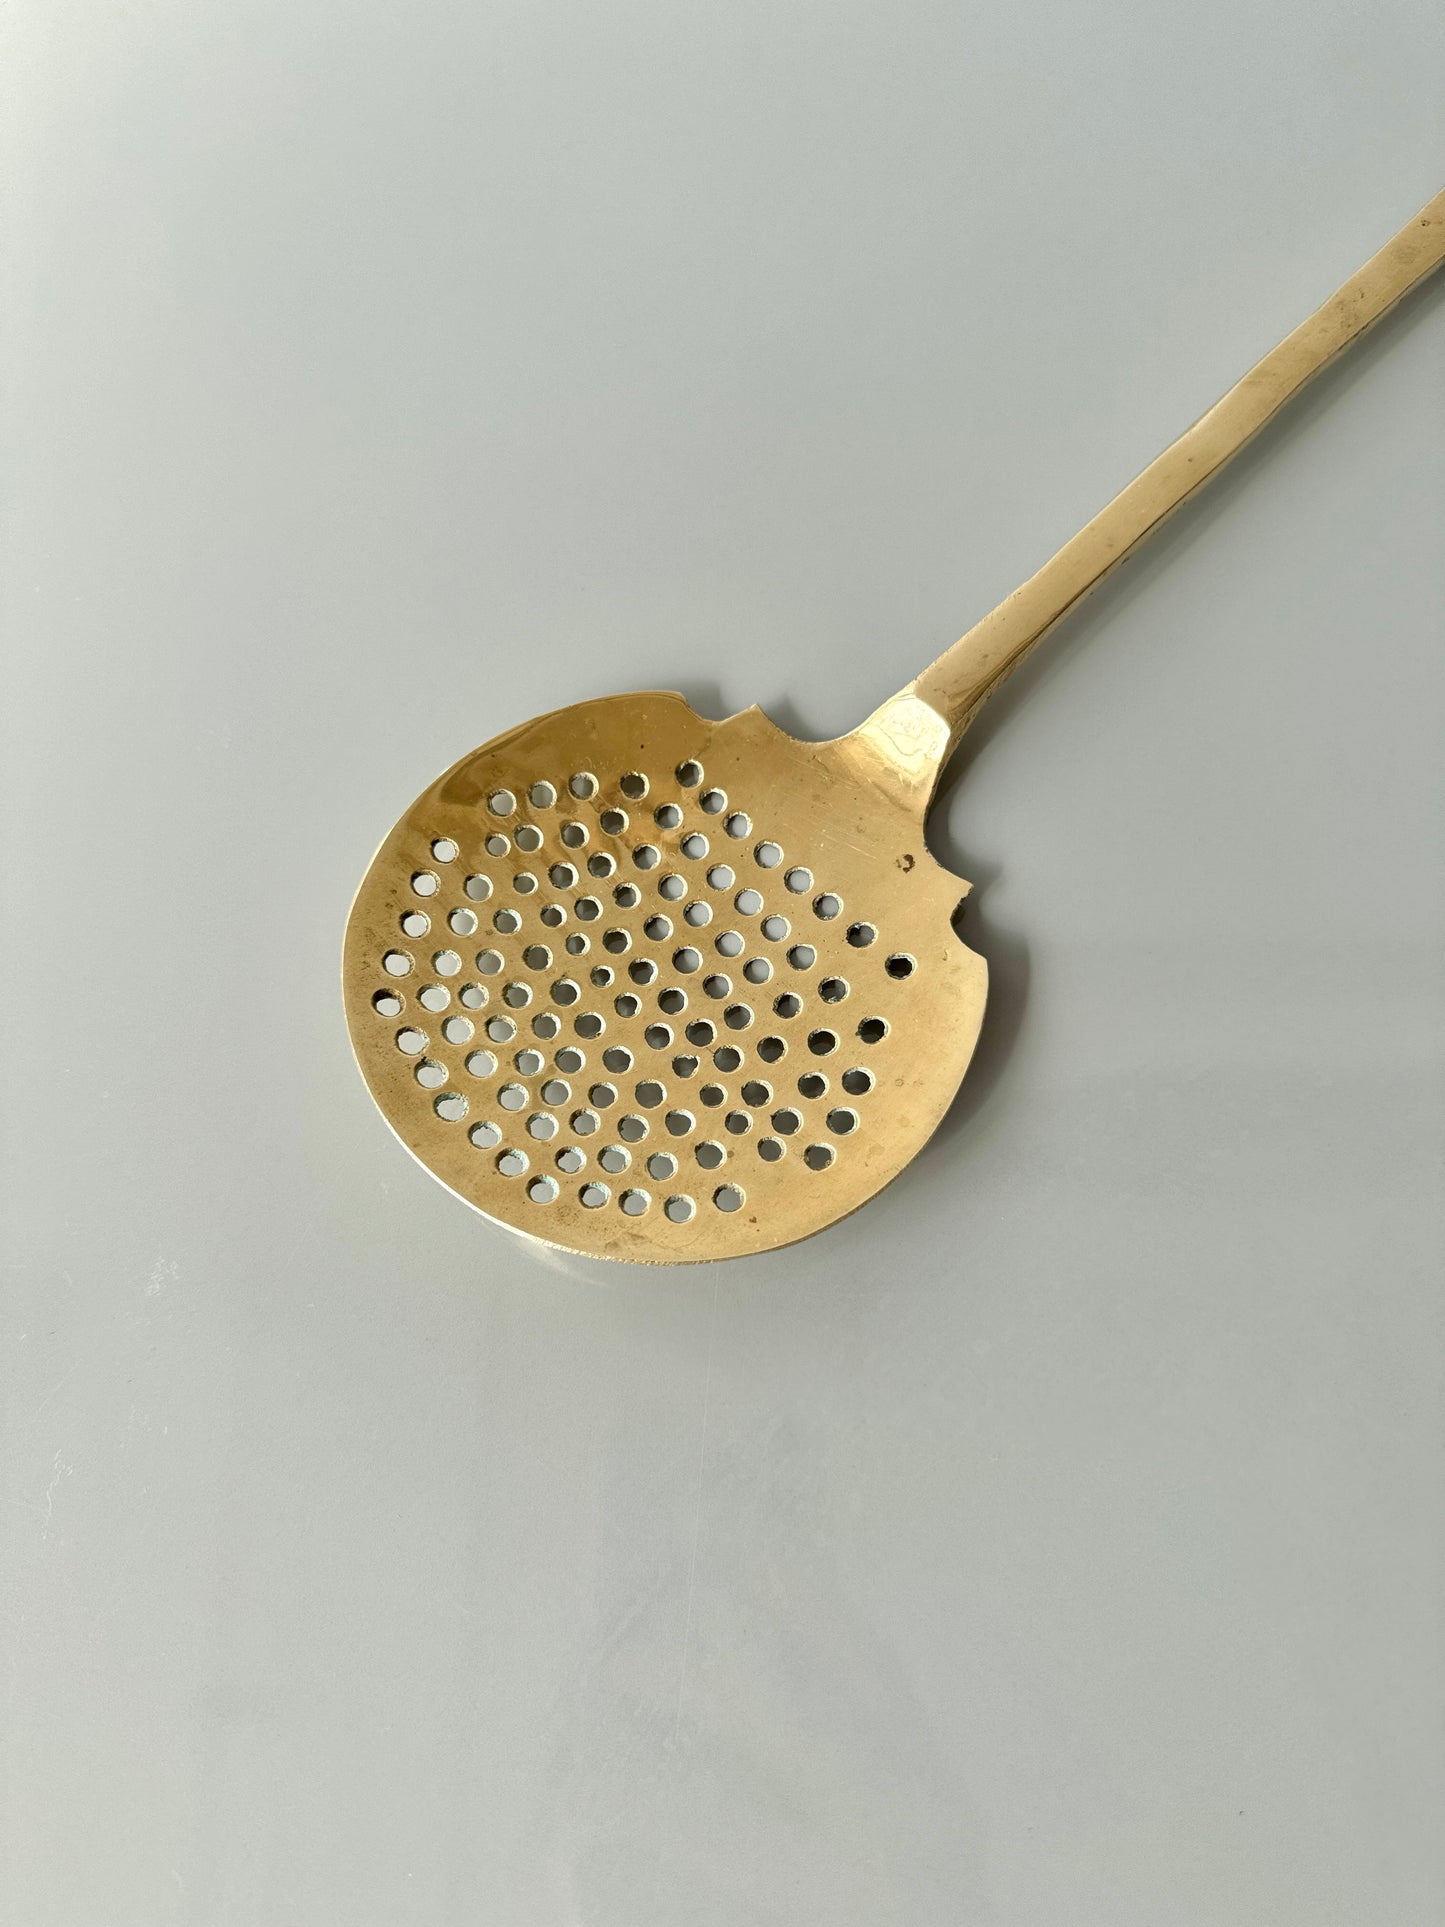 Large Vintage Slotted Brass Spoon